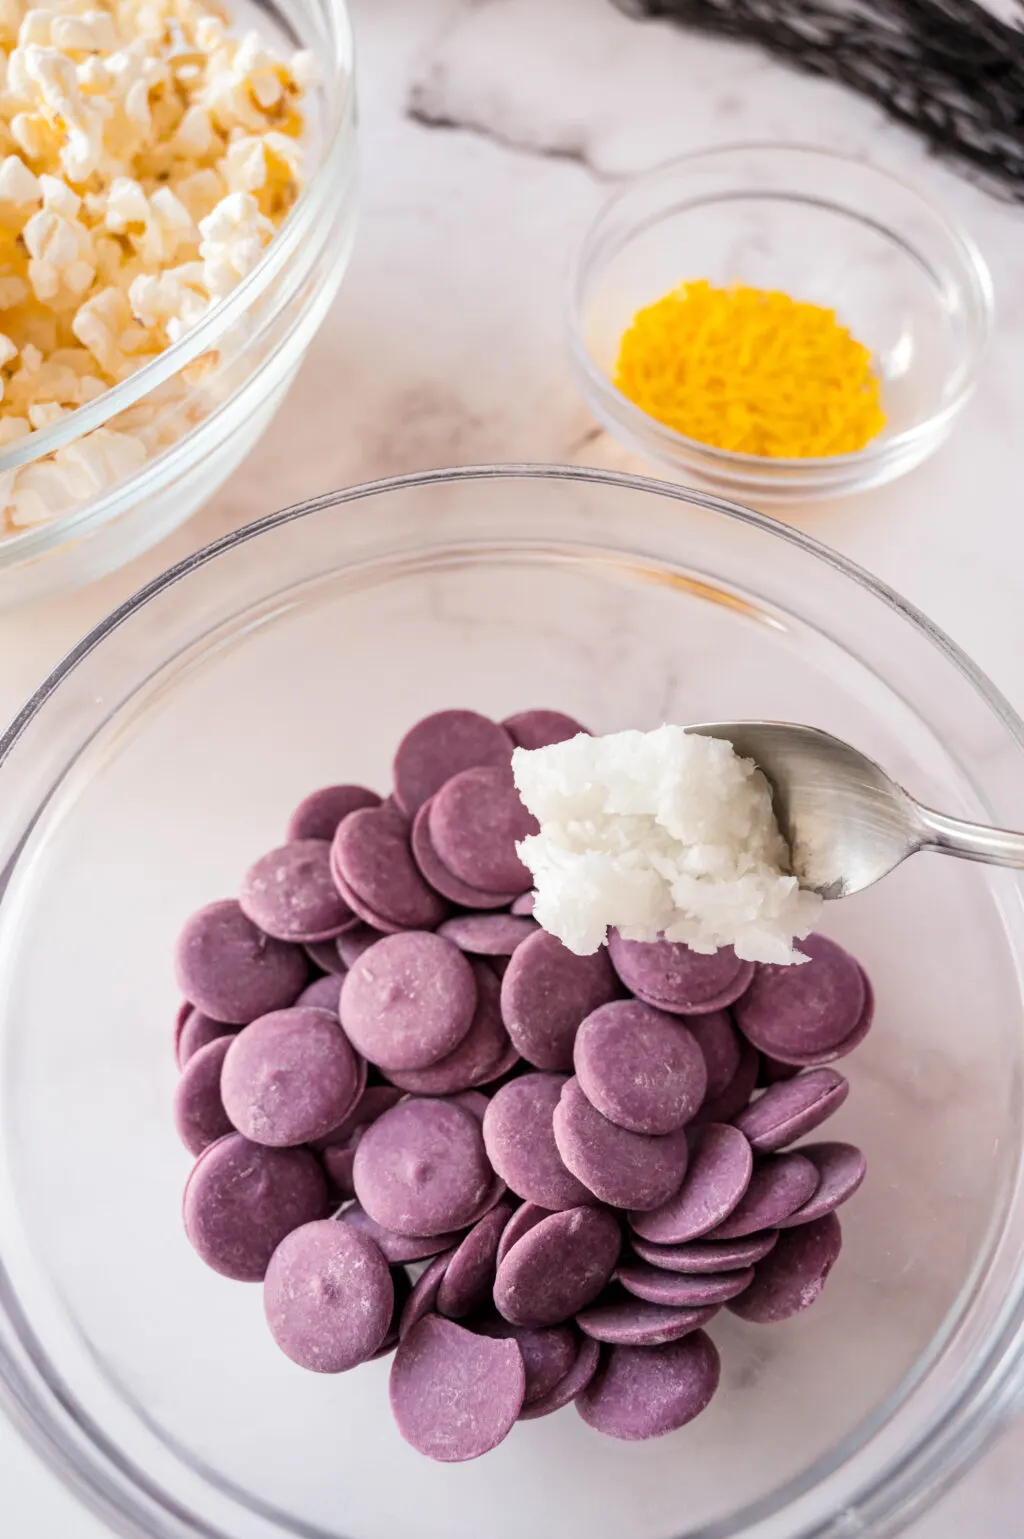 coconut oil being added to purple candy melts